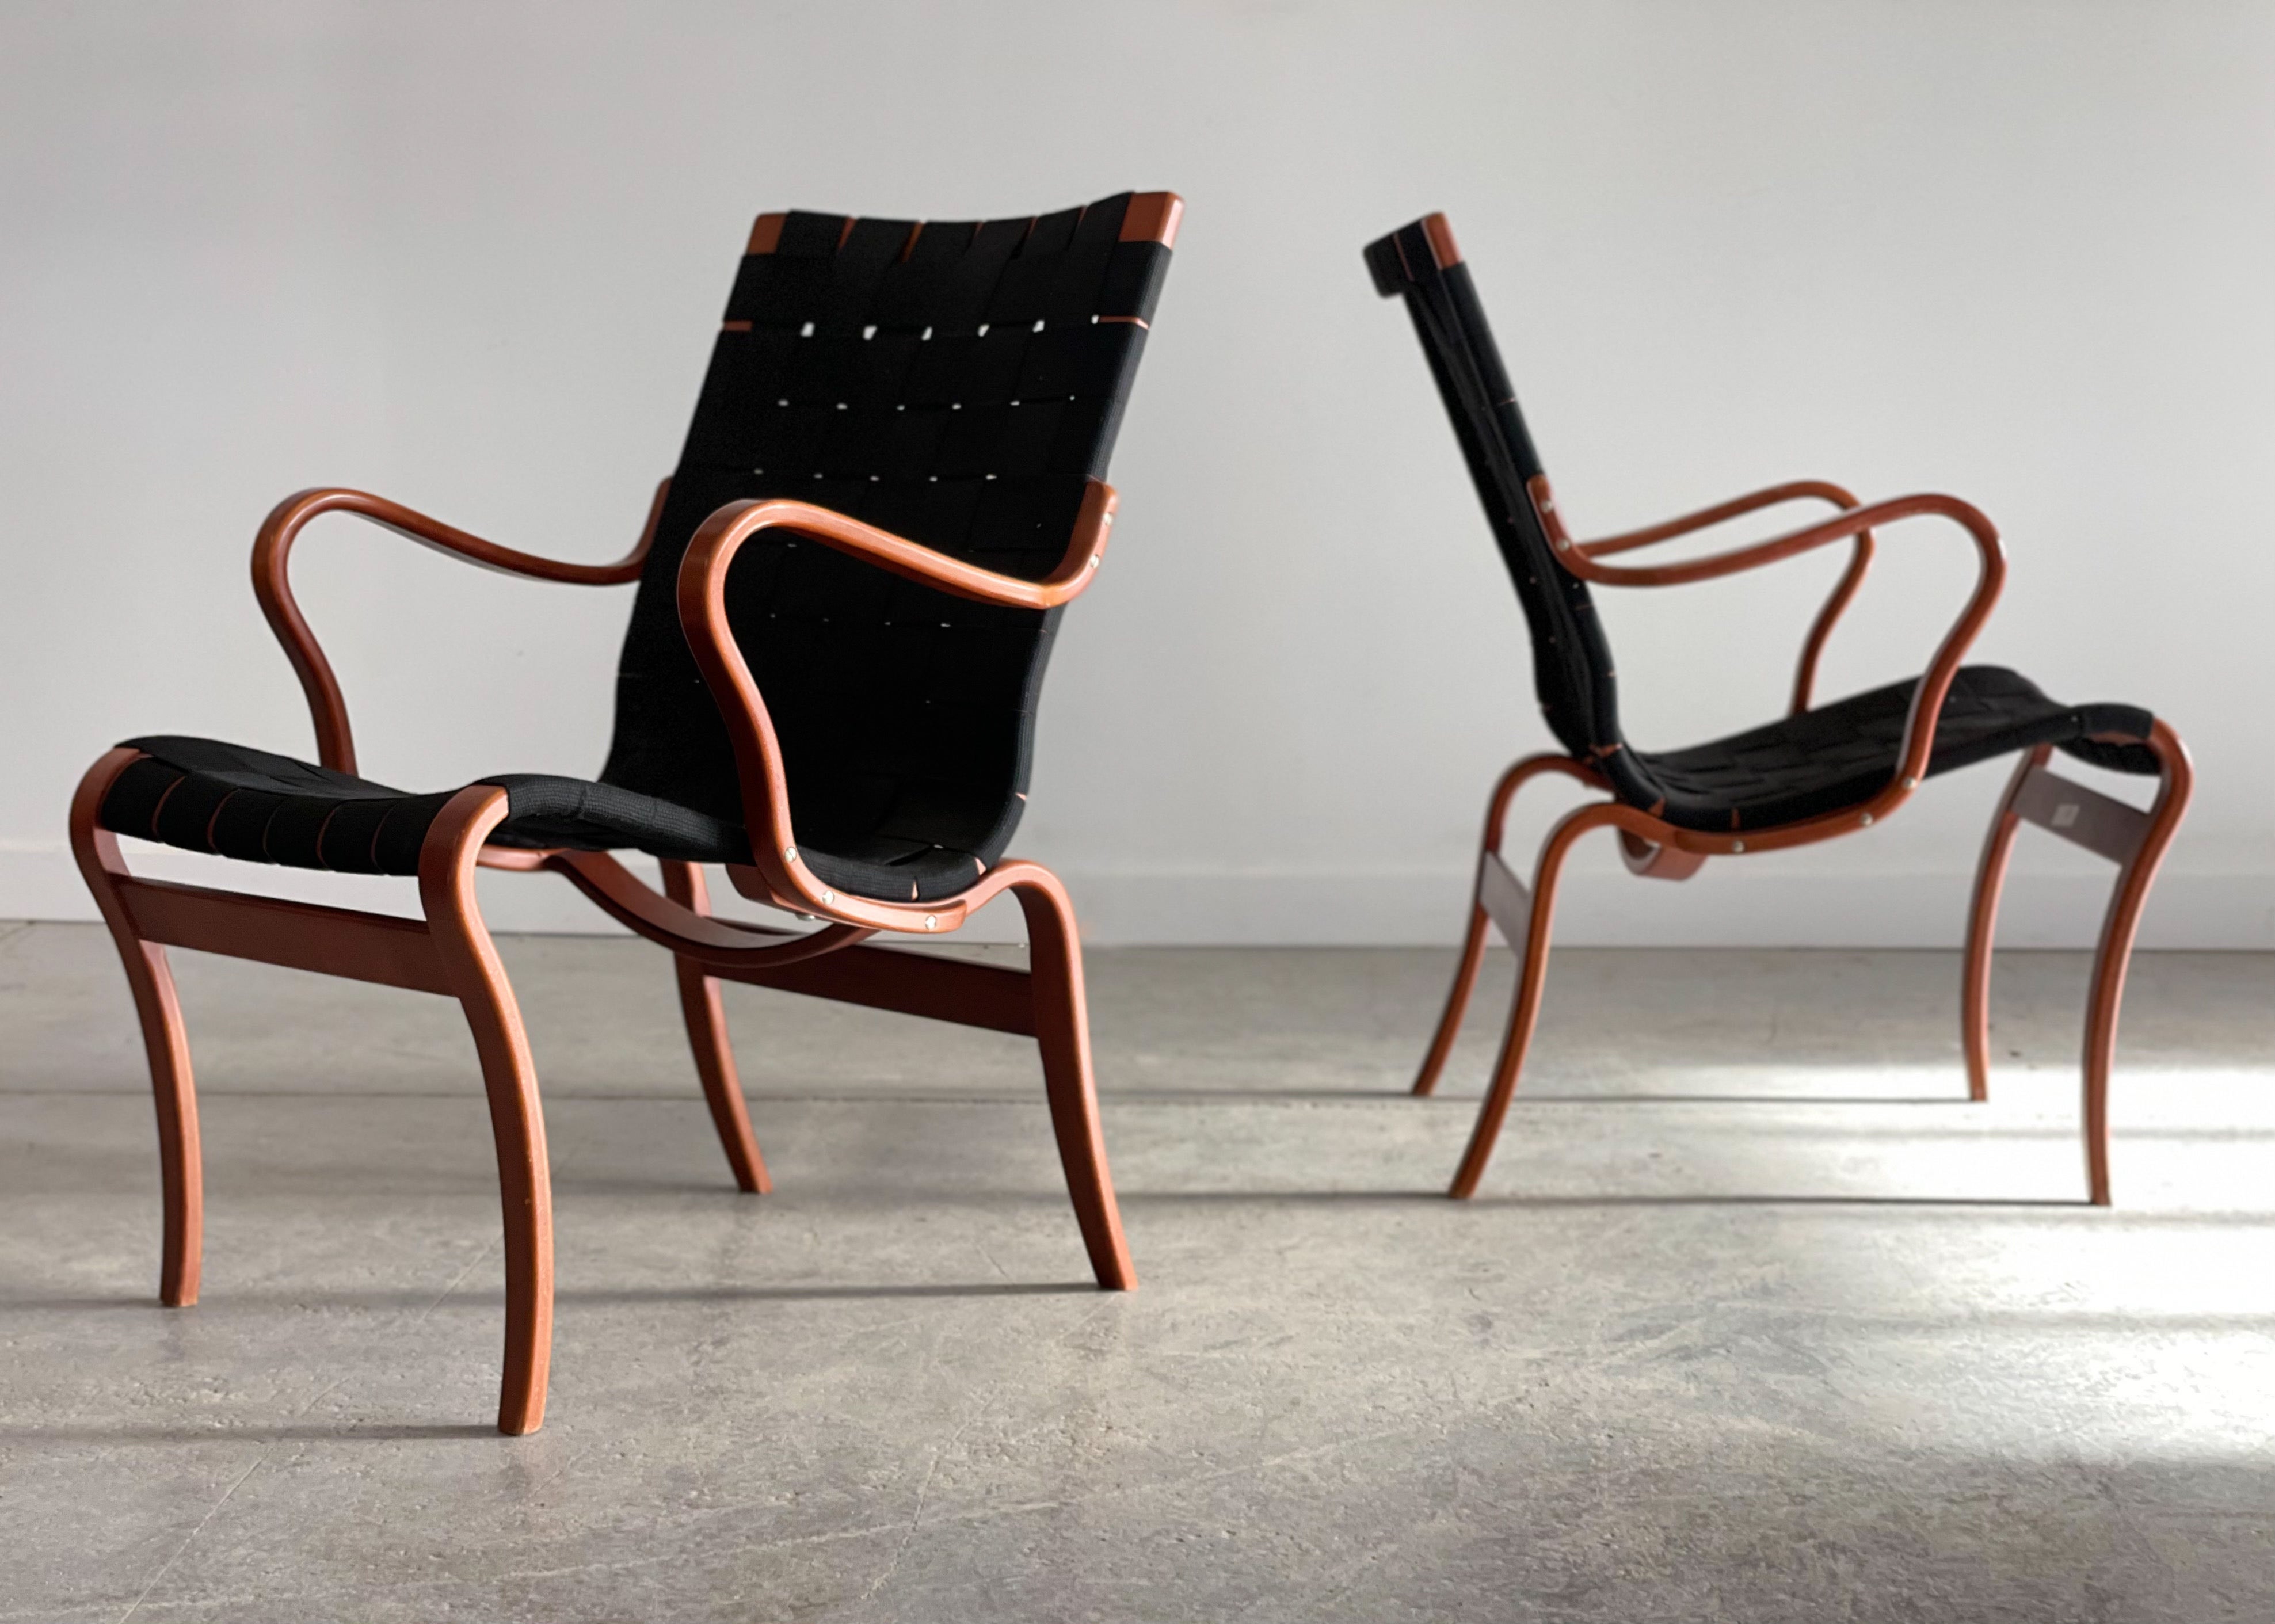 An incredible pair of ‘Mina’ lounge chairs designed by Bruno Mathsson for Dux, Sweden. These chairs feature beautifully sculptural bentwood frames with cotton webbing and are amazing from every angle. Measures 23.25”W x 26” D x 32” H back / 16”